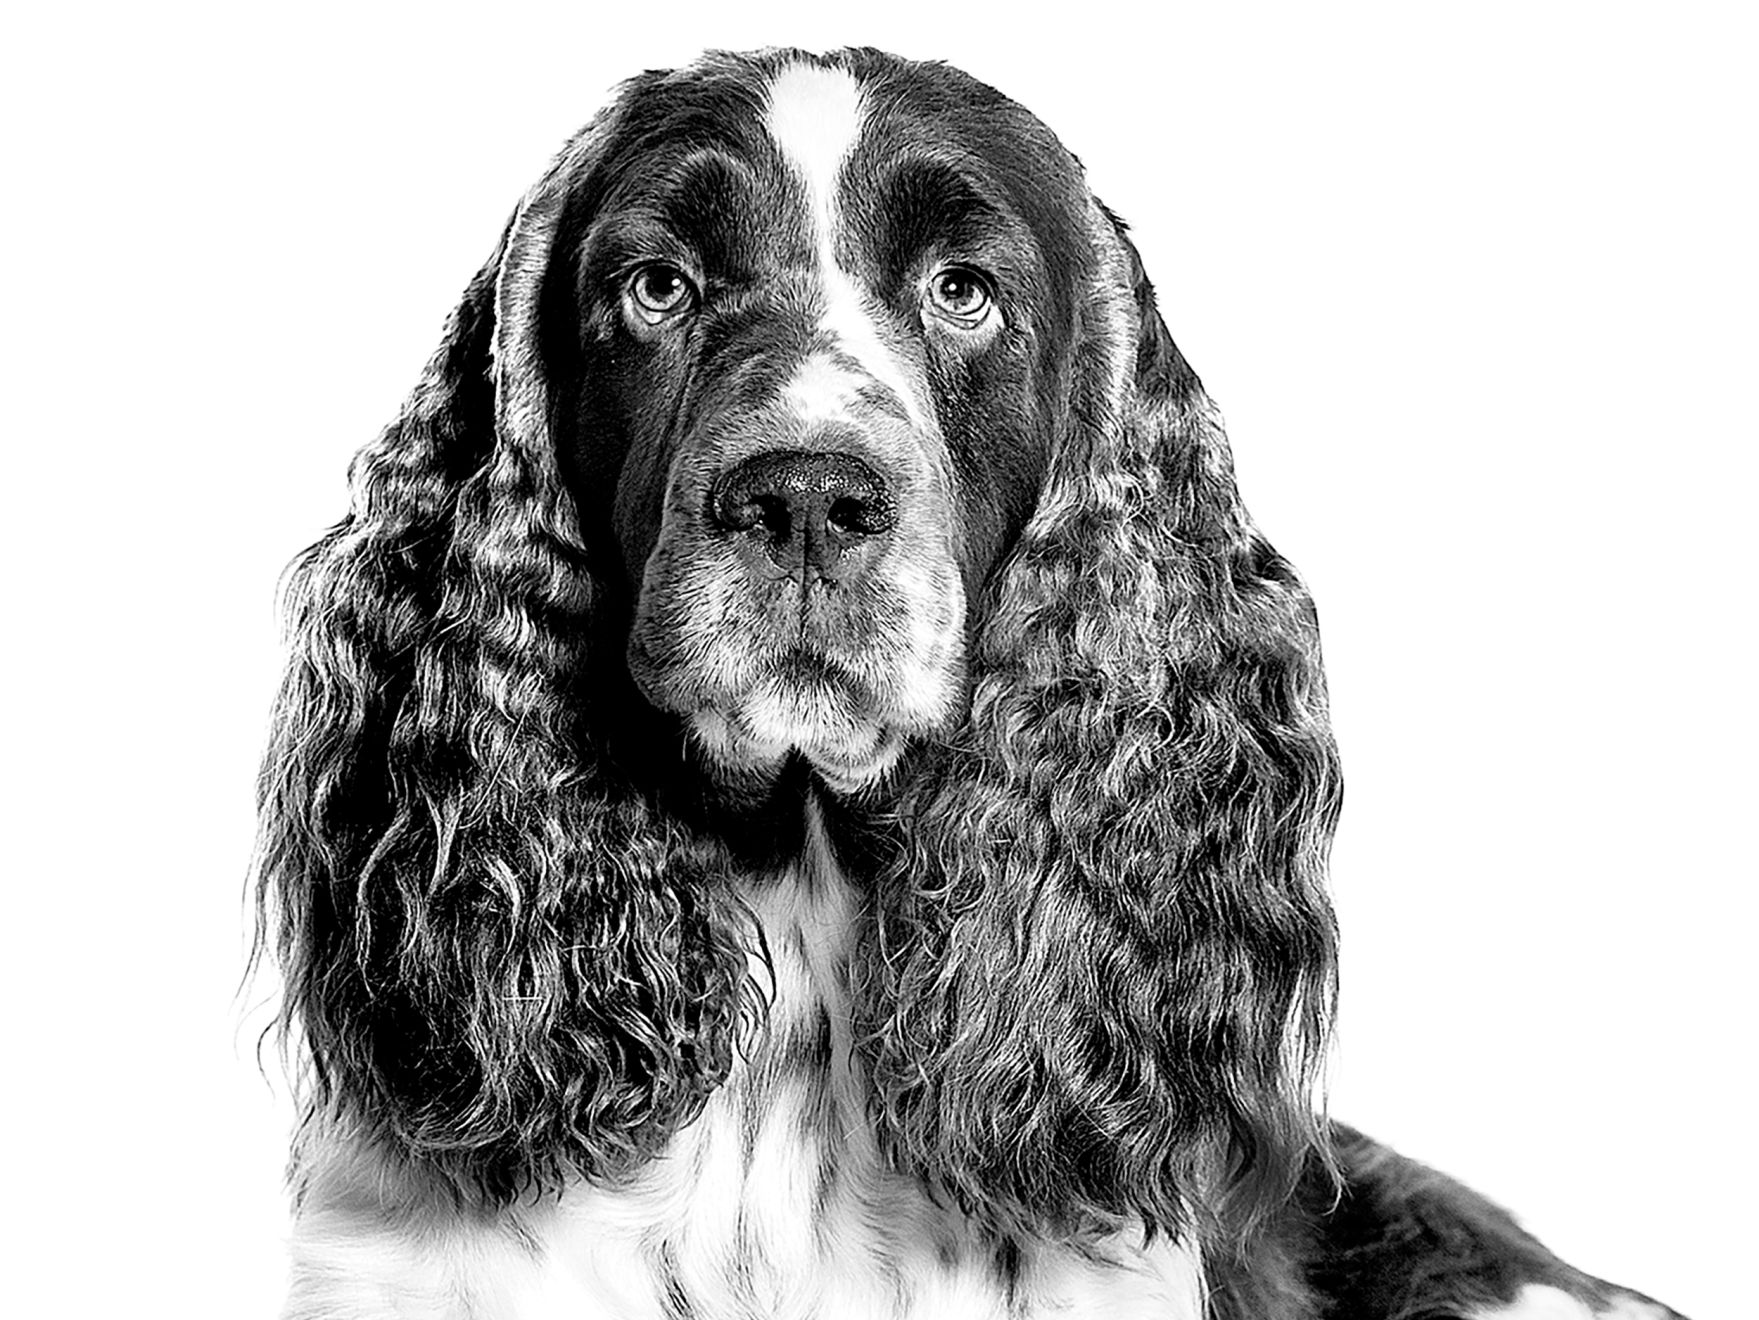 English Springer Spaniel adult lying down in black and white on a white background